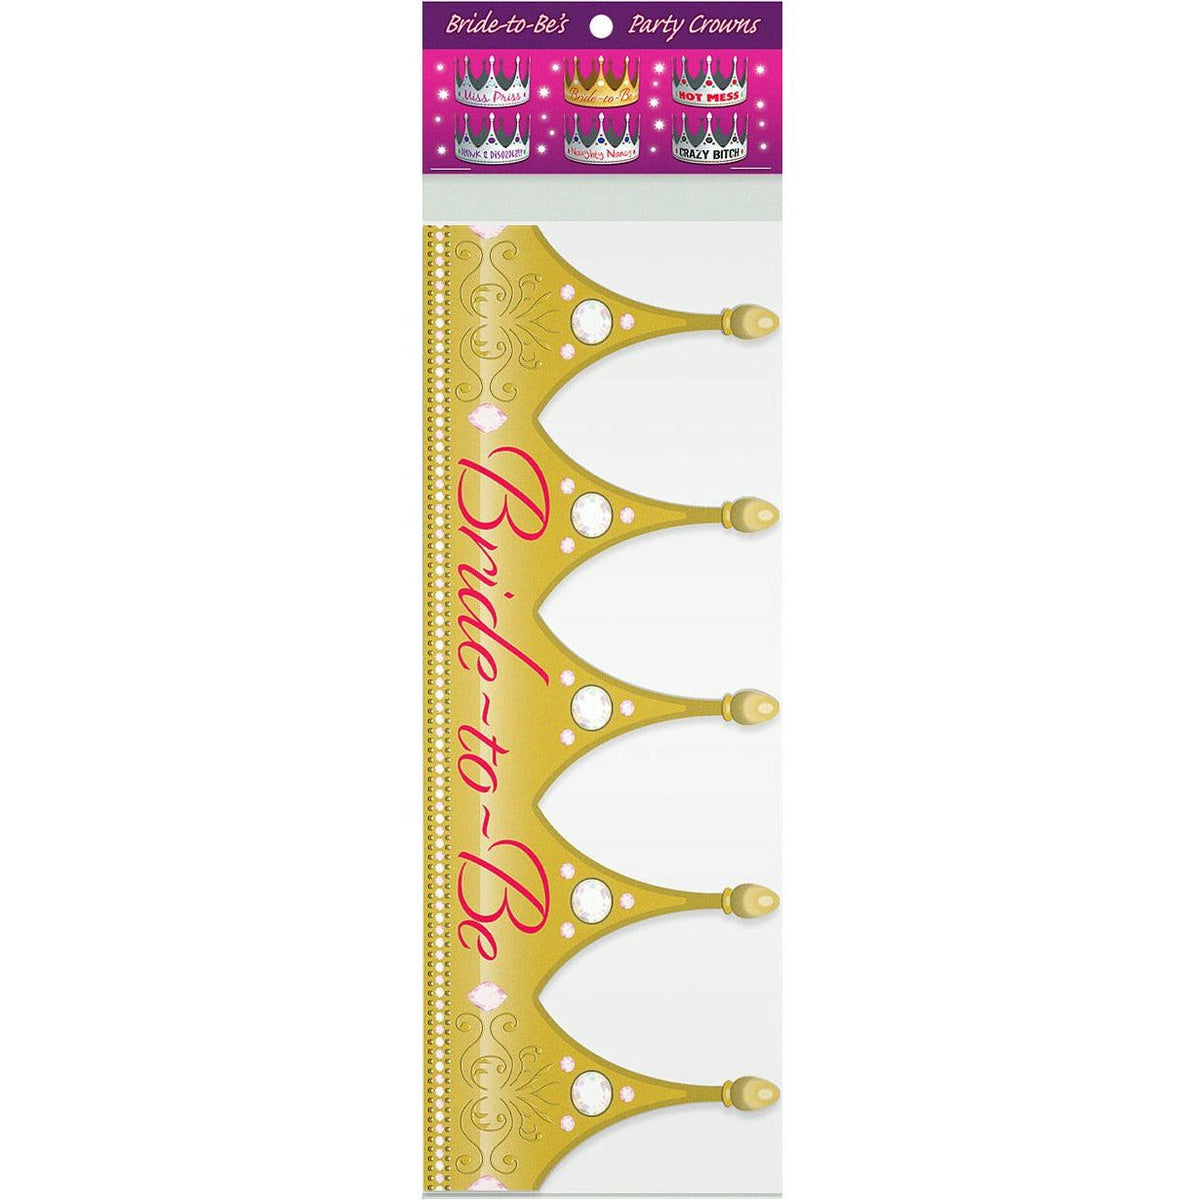 Kheper Games Bride to Be&#39;s Party Crowns - 6 Pack